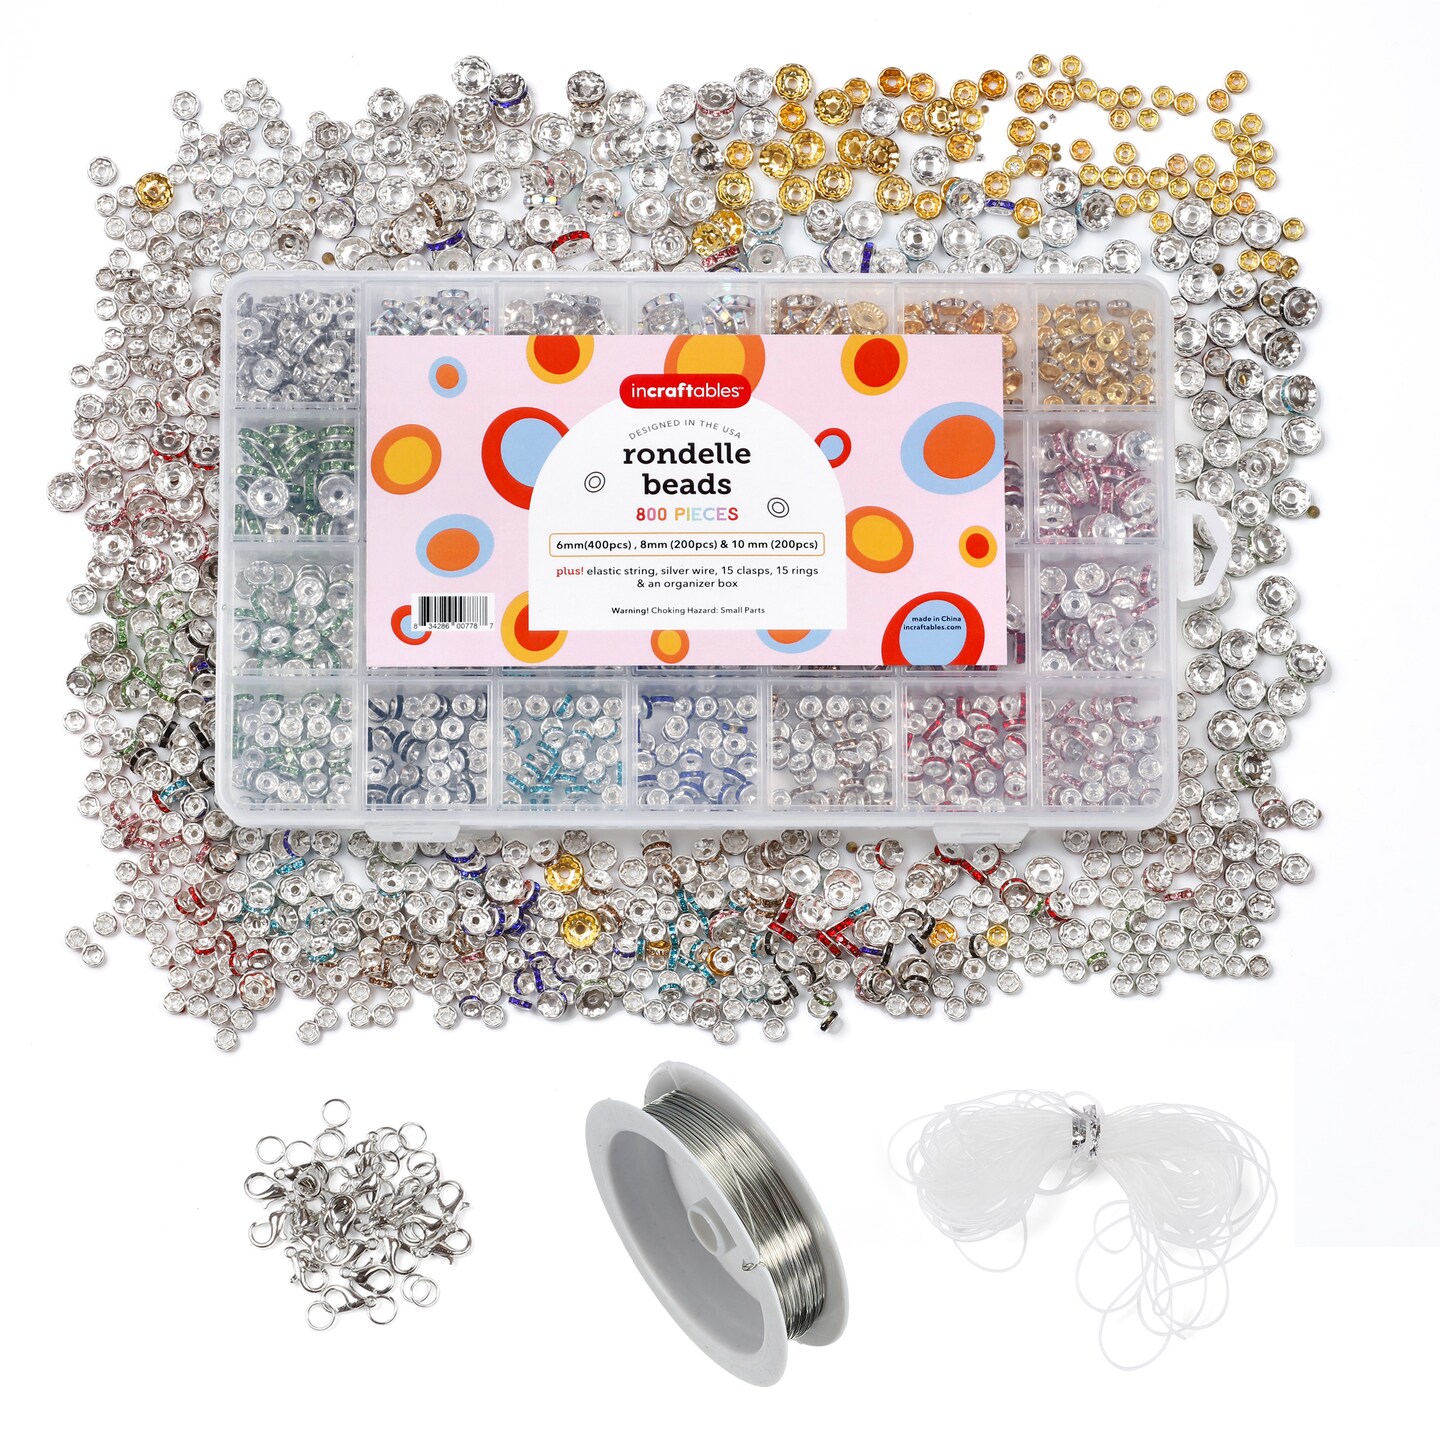 Incraftables Rondelle Beads for Jewelry Making 800pcs. Rhinestone Spacer Beads for Kids &#x26; Adults. Crystal Rondelle Spacer Beads for Bracelet Making (6mm, 8mm &#x26; 10 mm). Bead Spacers for Jewelry Making